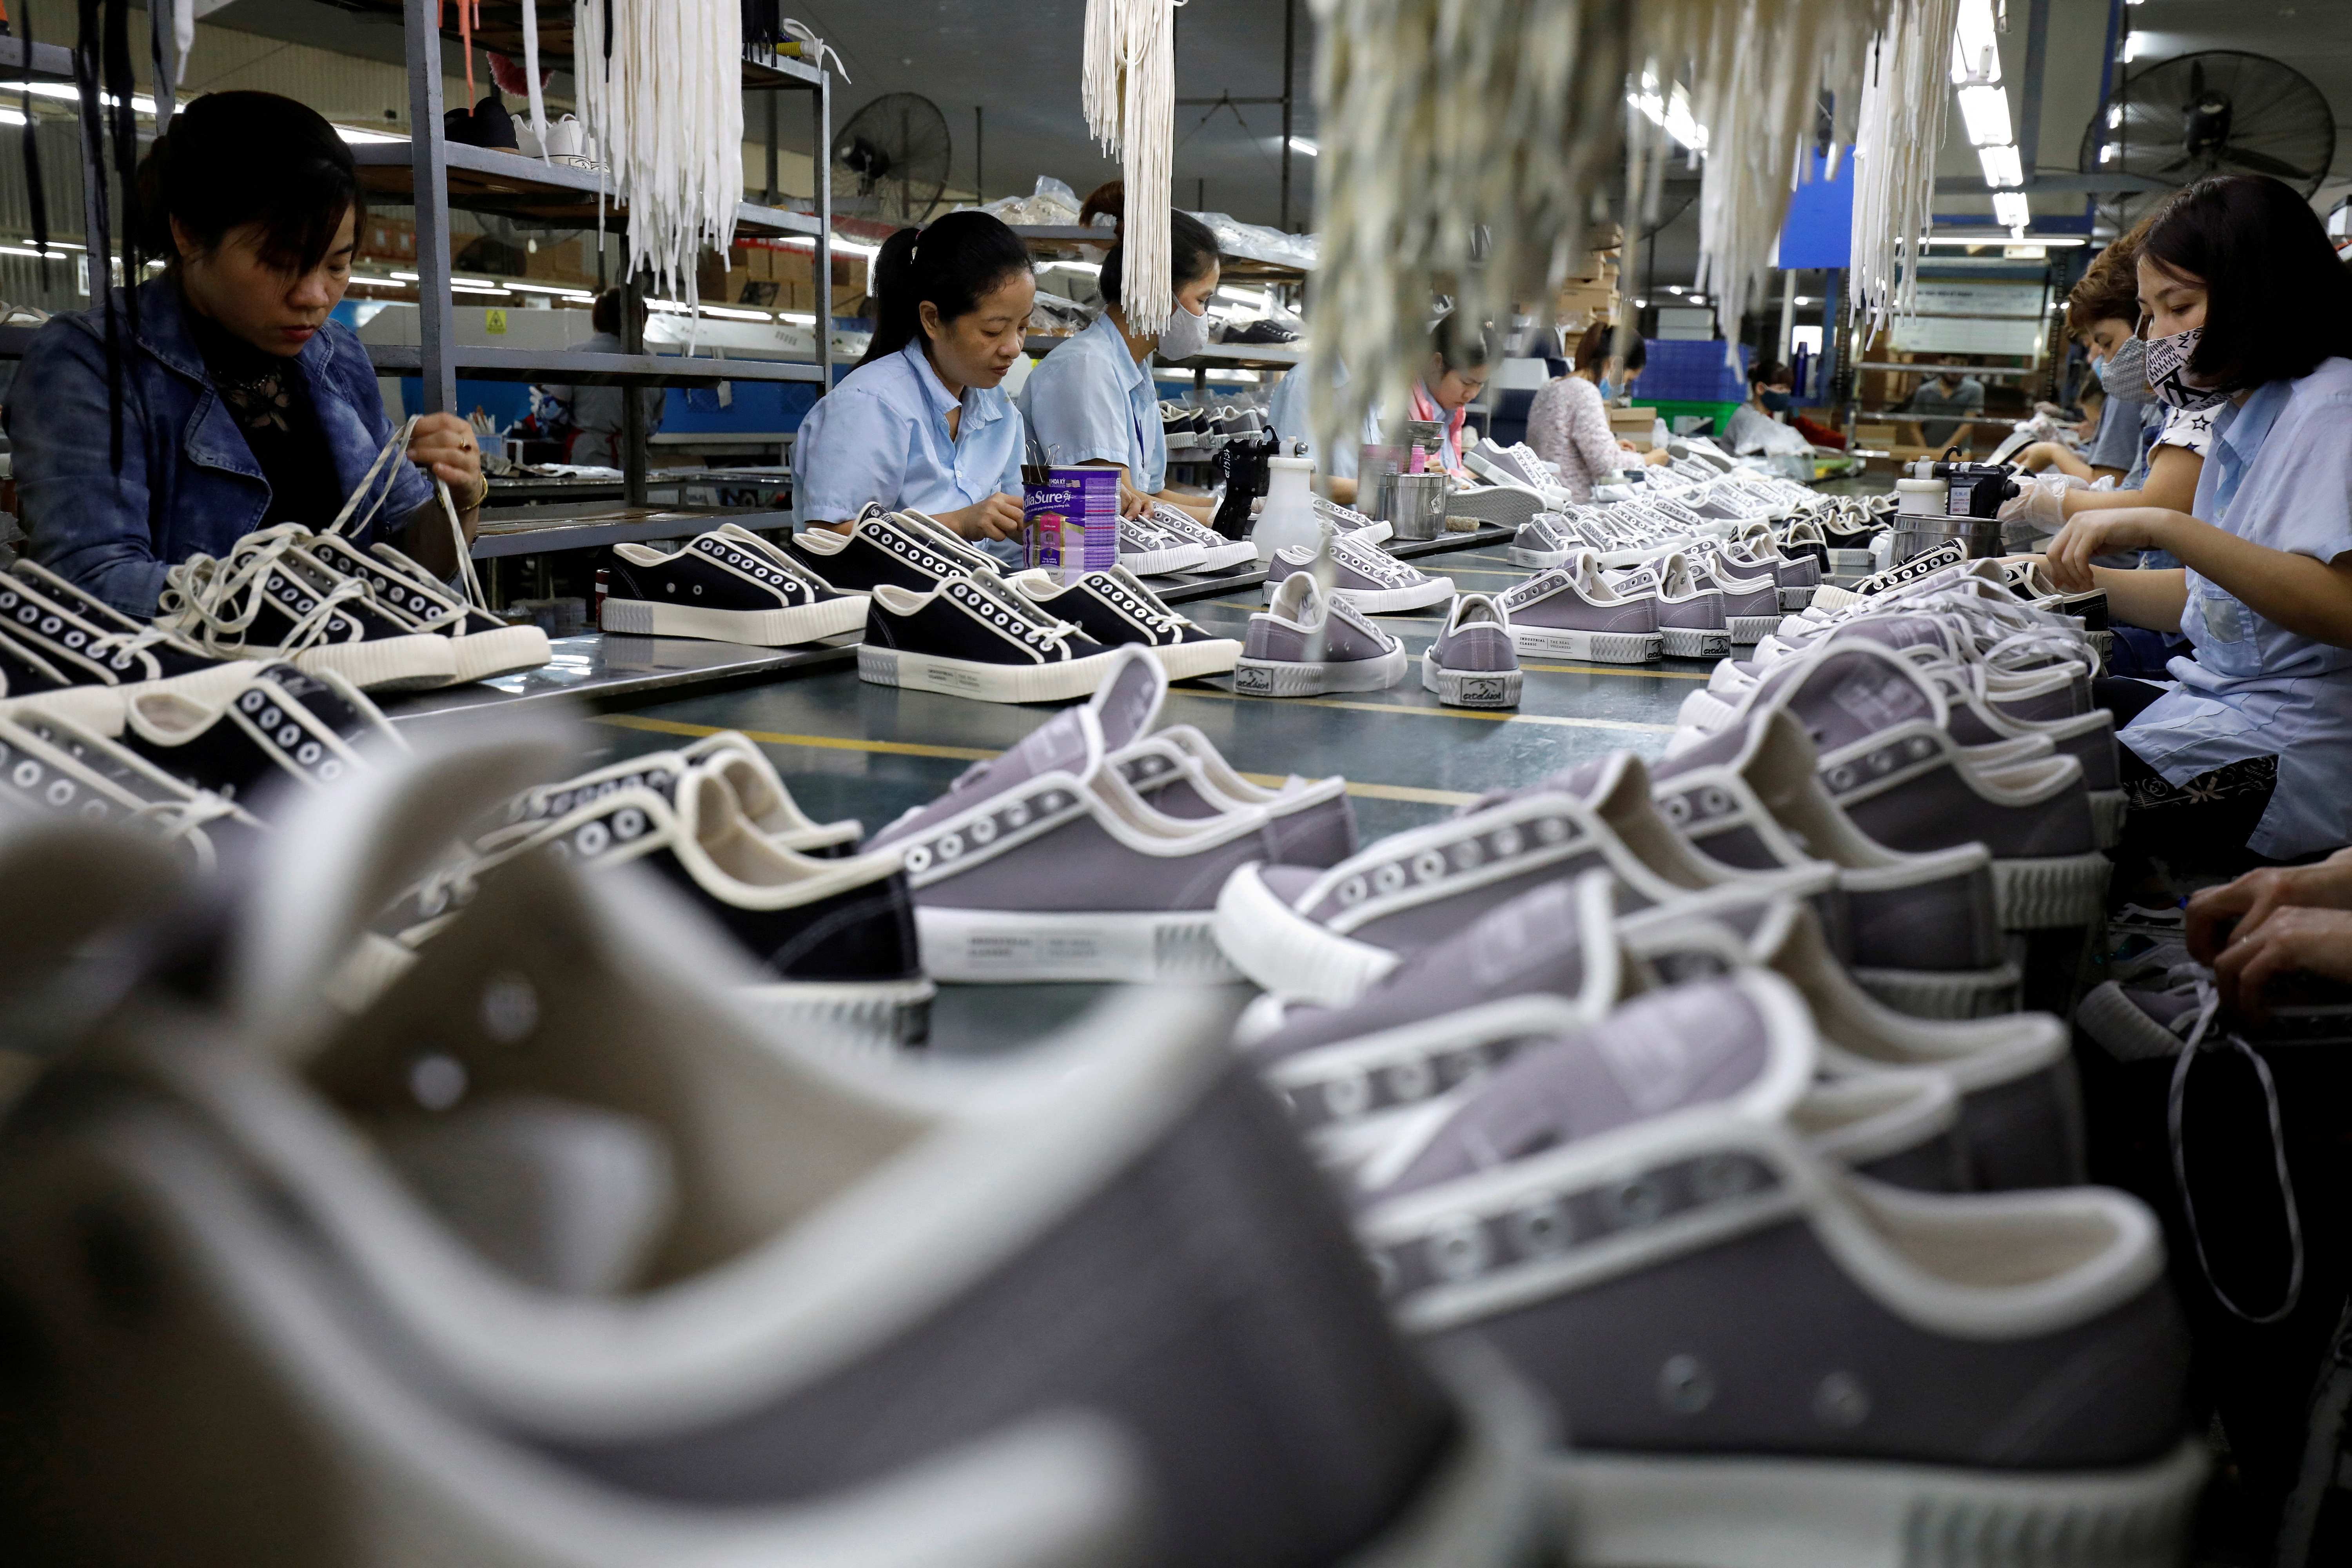 The making of shoes for export at a factory in Hanoi